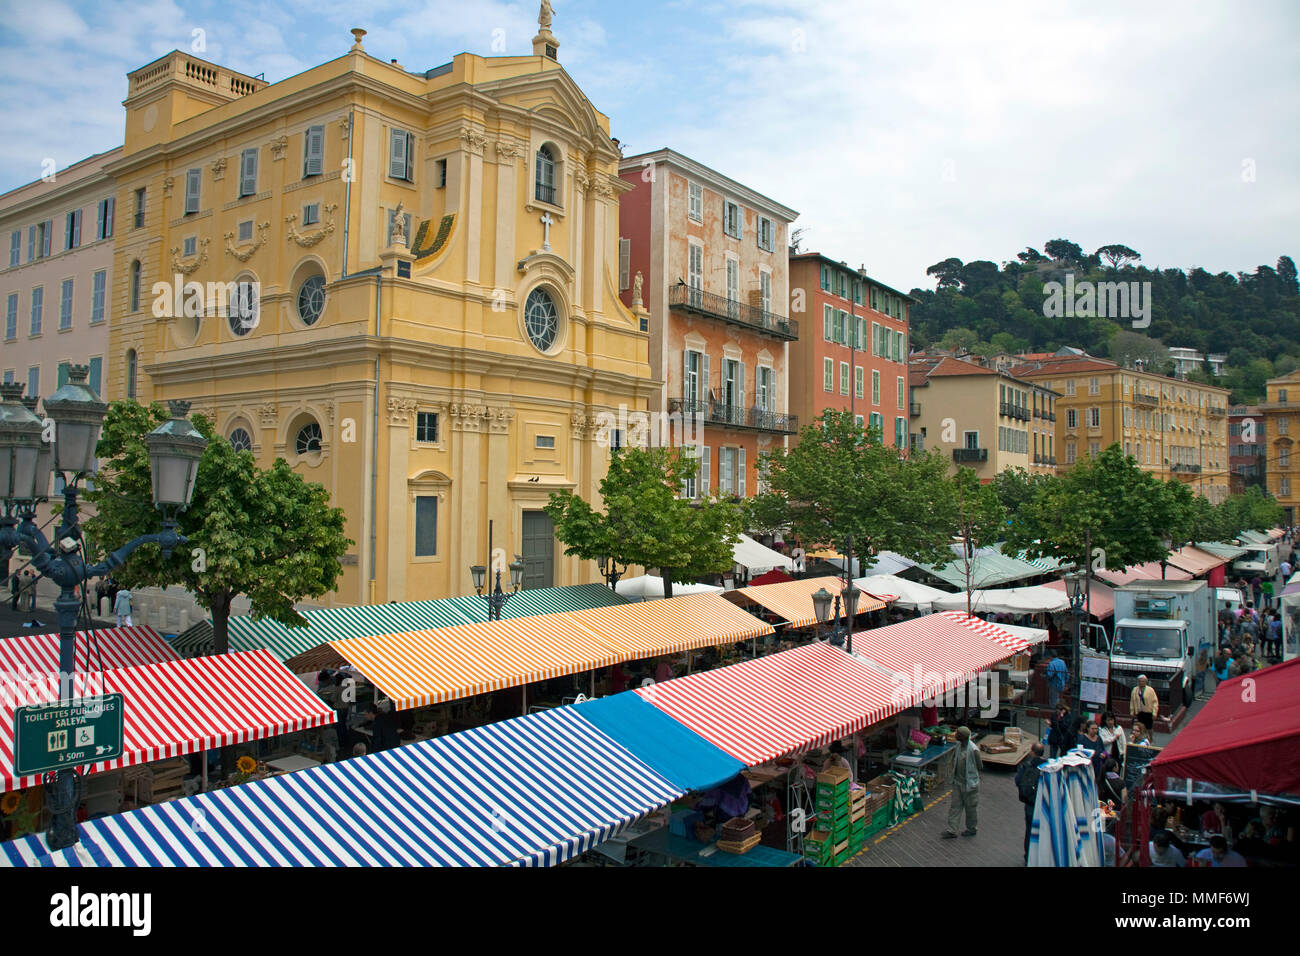 Market at place Cours Saleya, Nice, Côte d’Azur, Alpes-Maritimes, South France, France, Europe Stock Photo